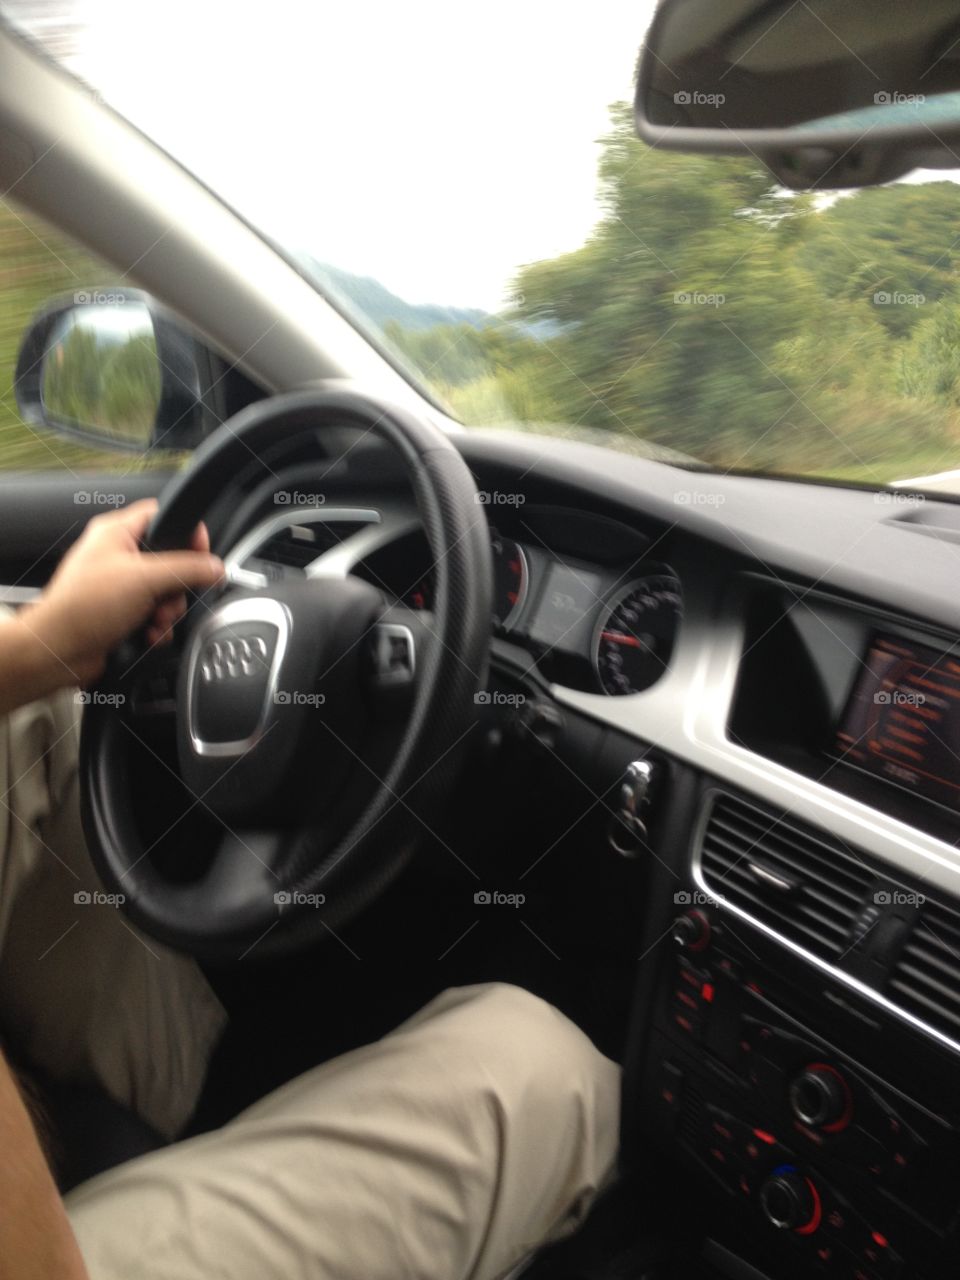 Drive and enoy. Love driving audi